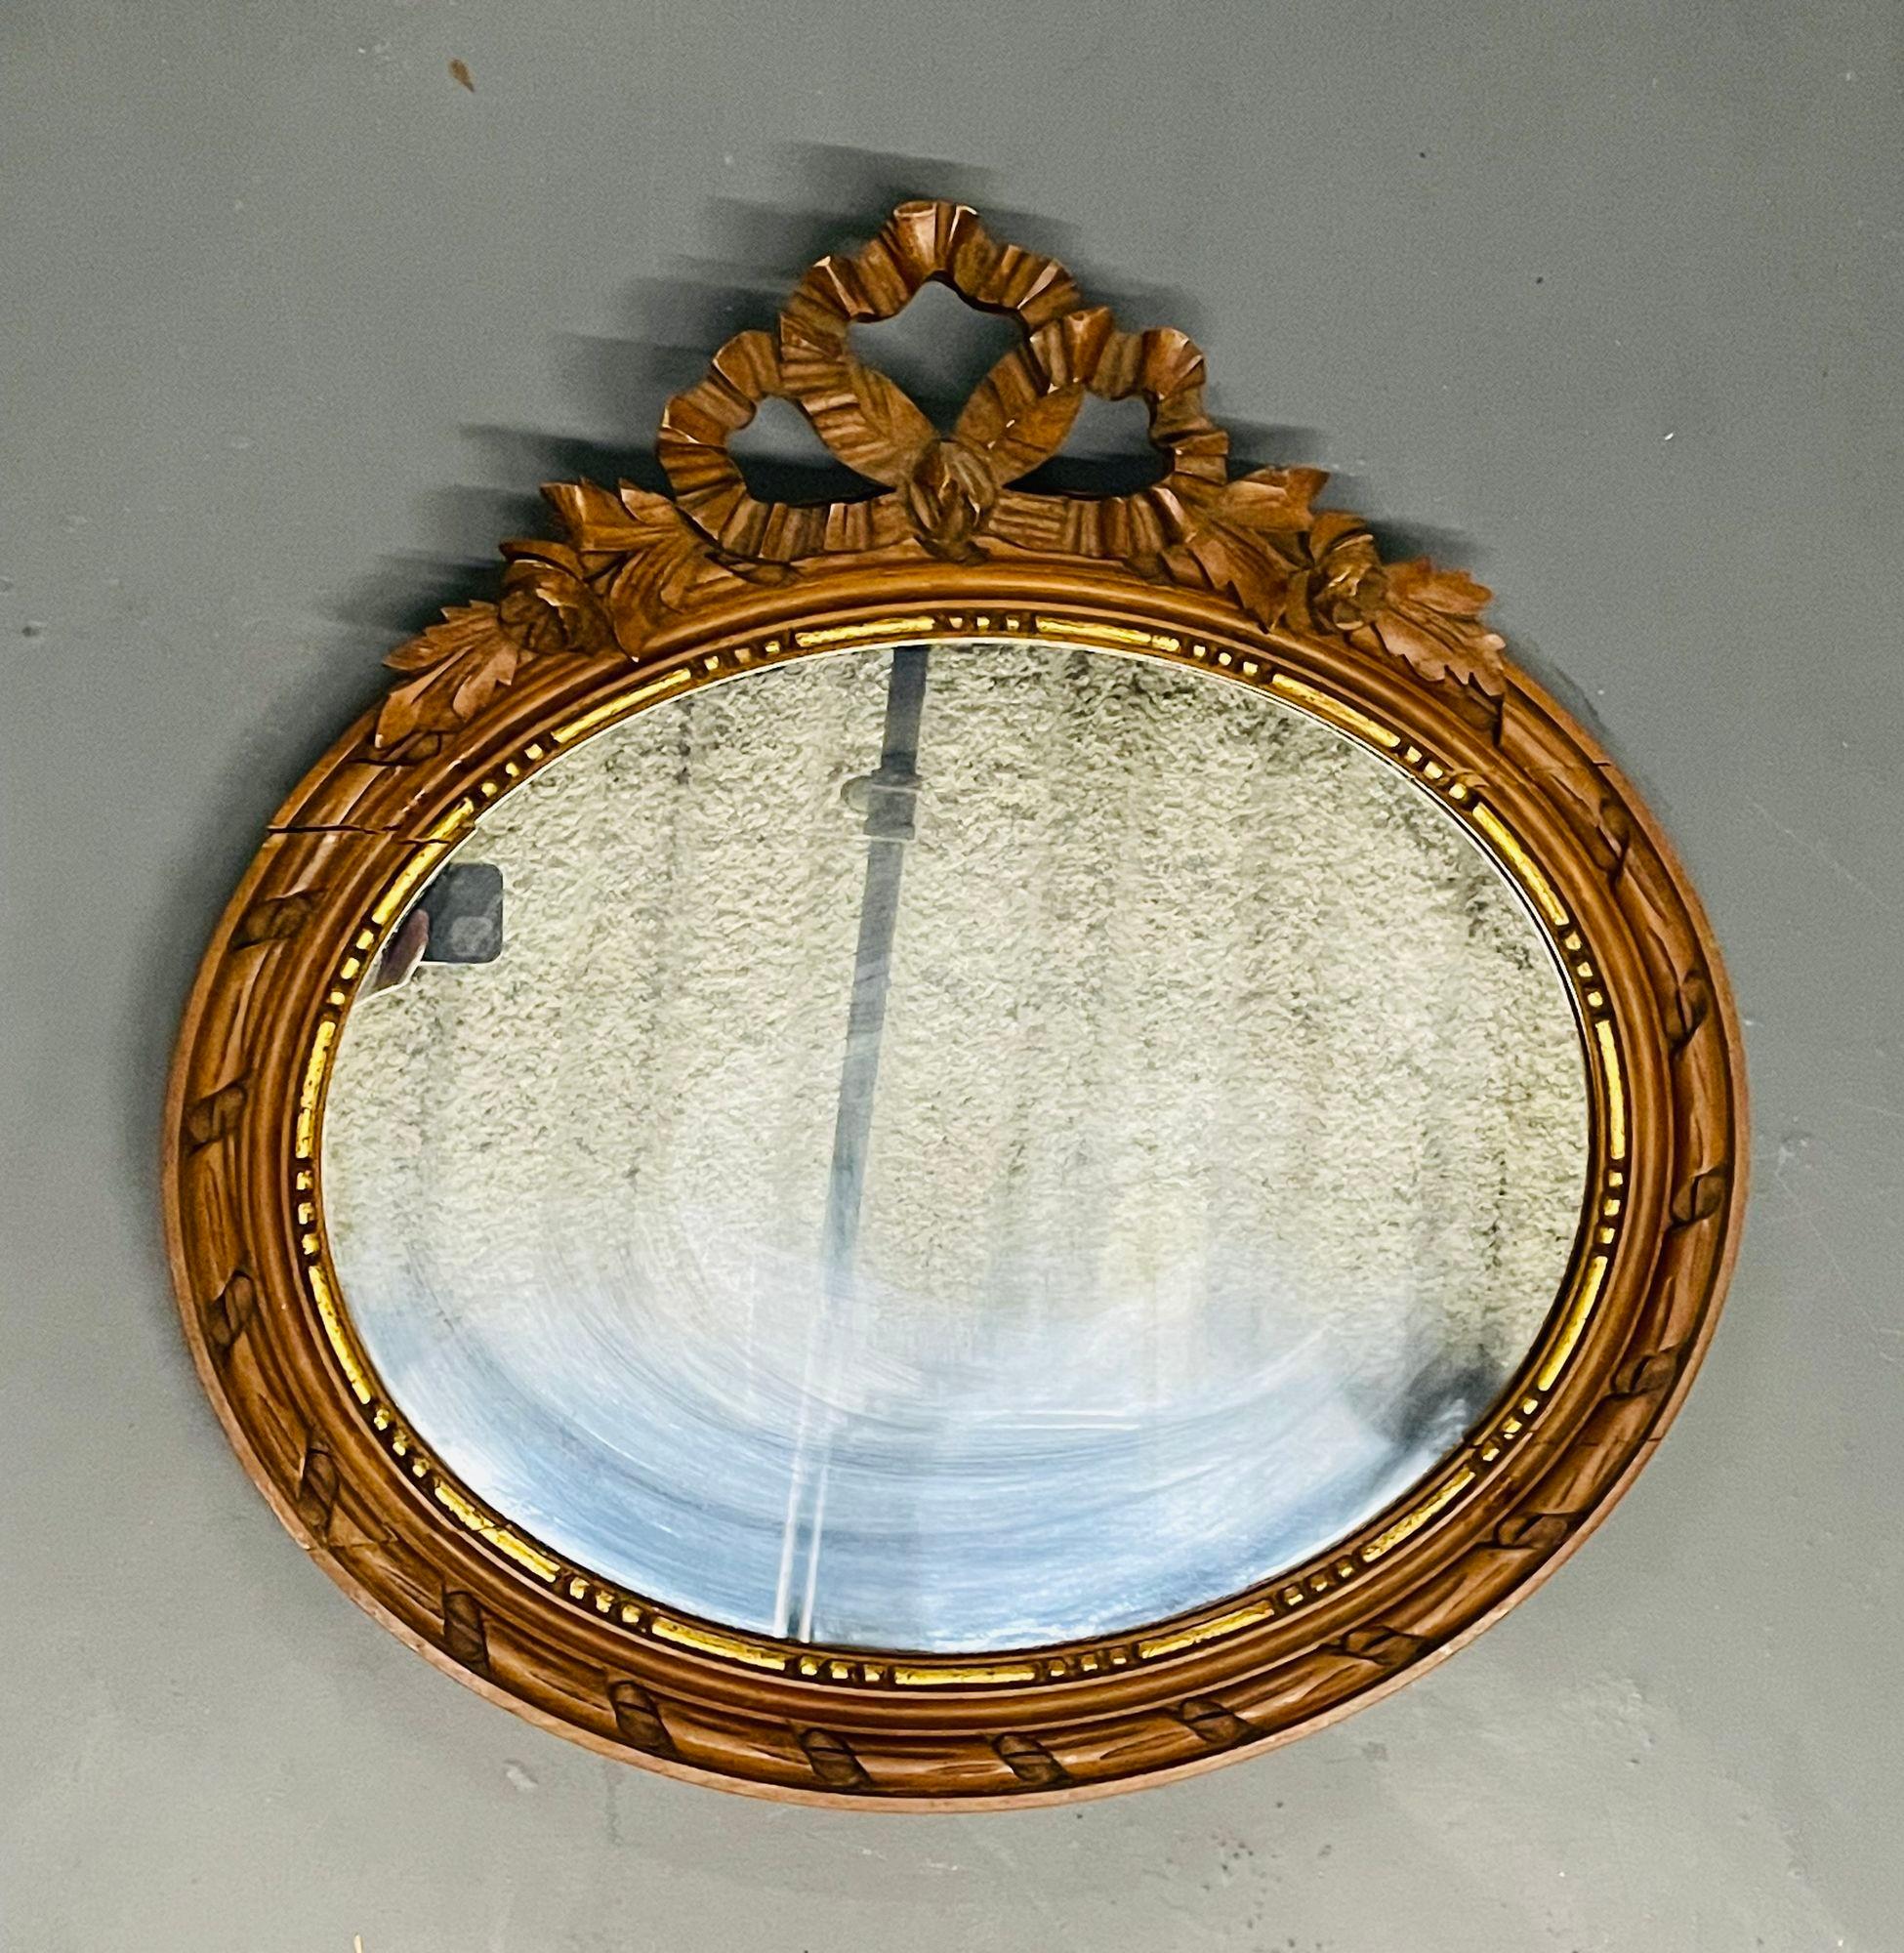 Louis XVI style gilt wood wall or console mirror
A sleek French oval gilt wood wall mirror having a clean center mirror panel framed in a gilt decorated frame terminating in a ribbon with bow and floral design. 
Measures: 23.5H x 24W.